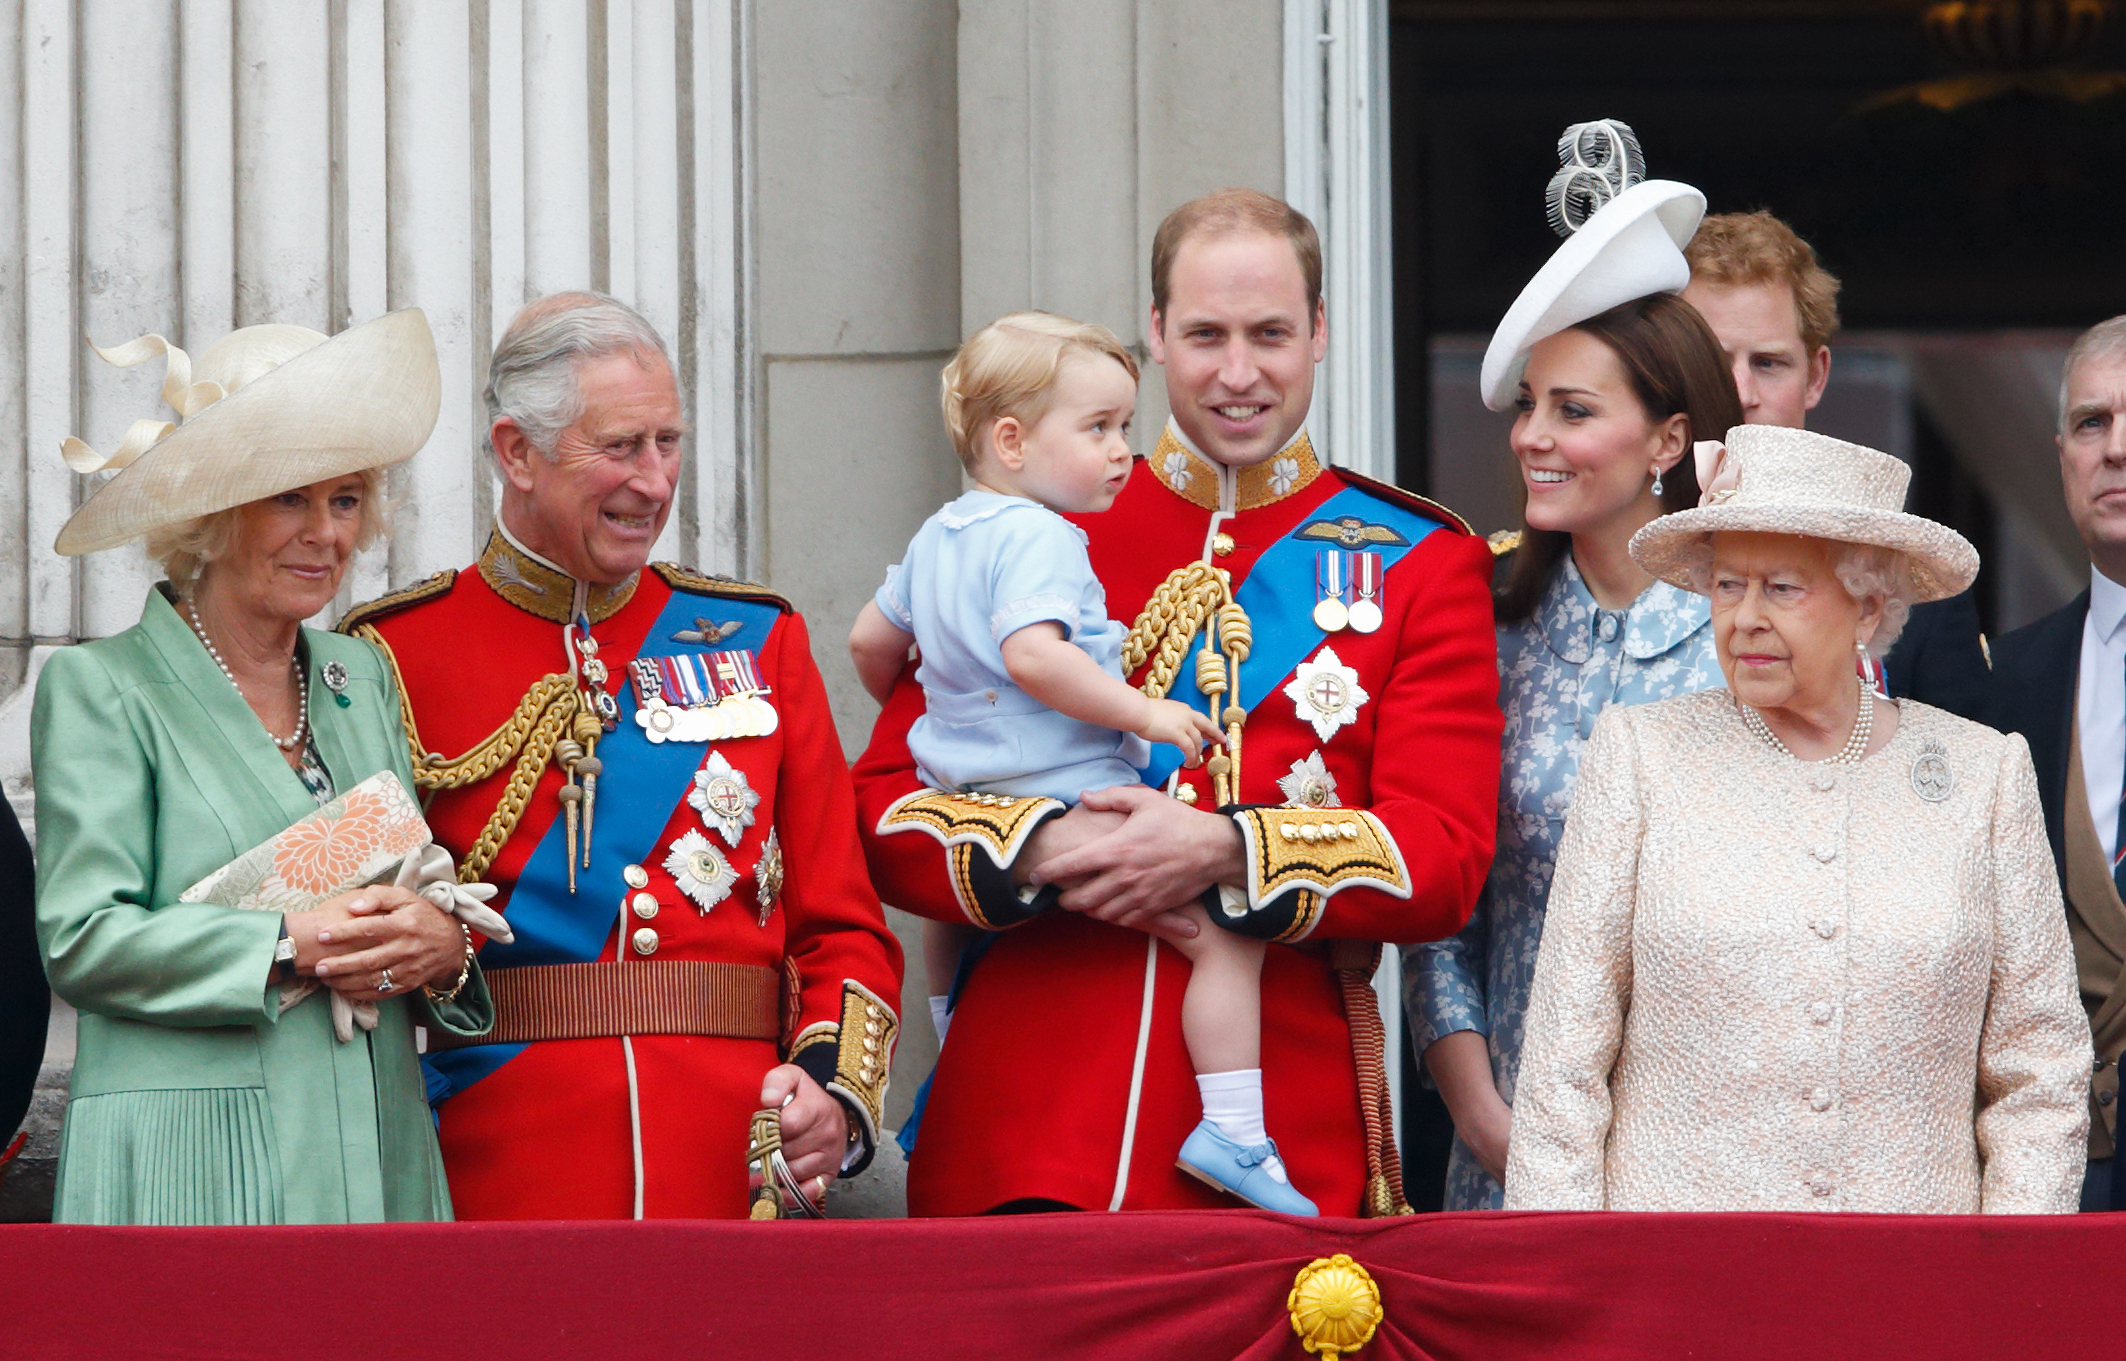 PHOTO:  The British royal family stand on the balcony of Buckingham Palace during Trooping the Color, June 13, 2015 in London.